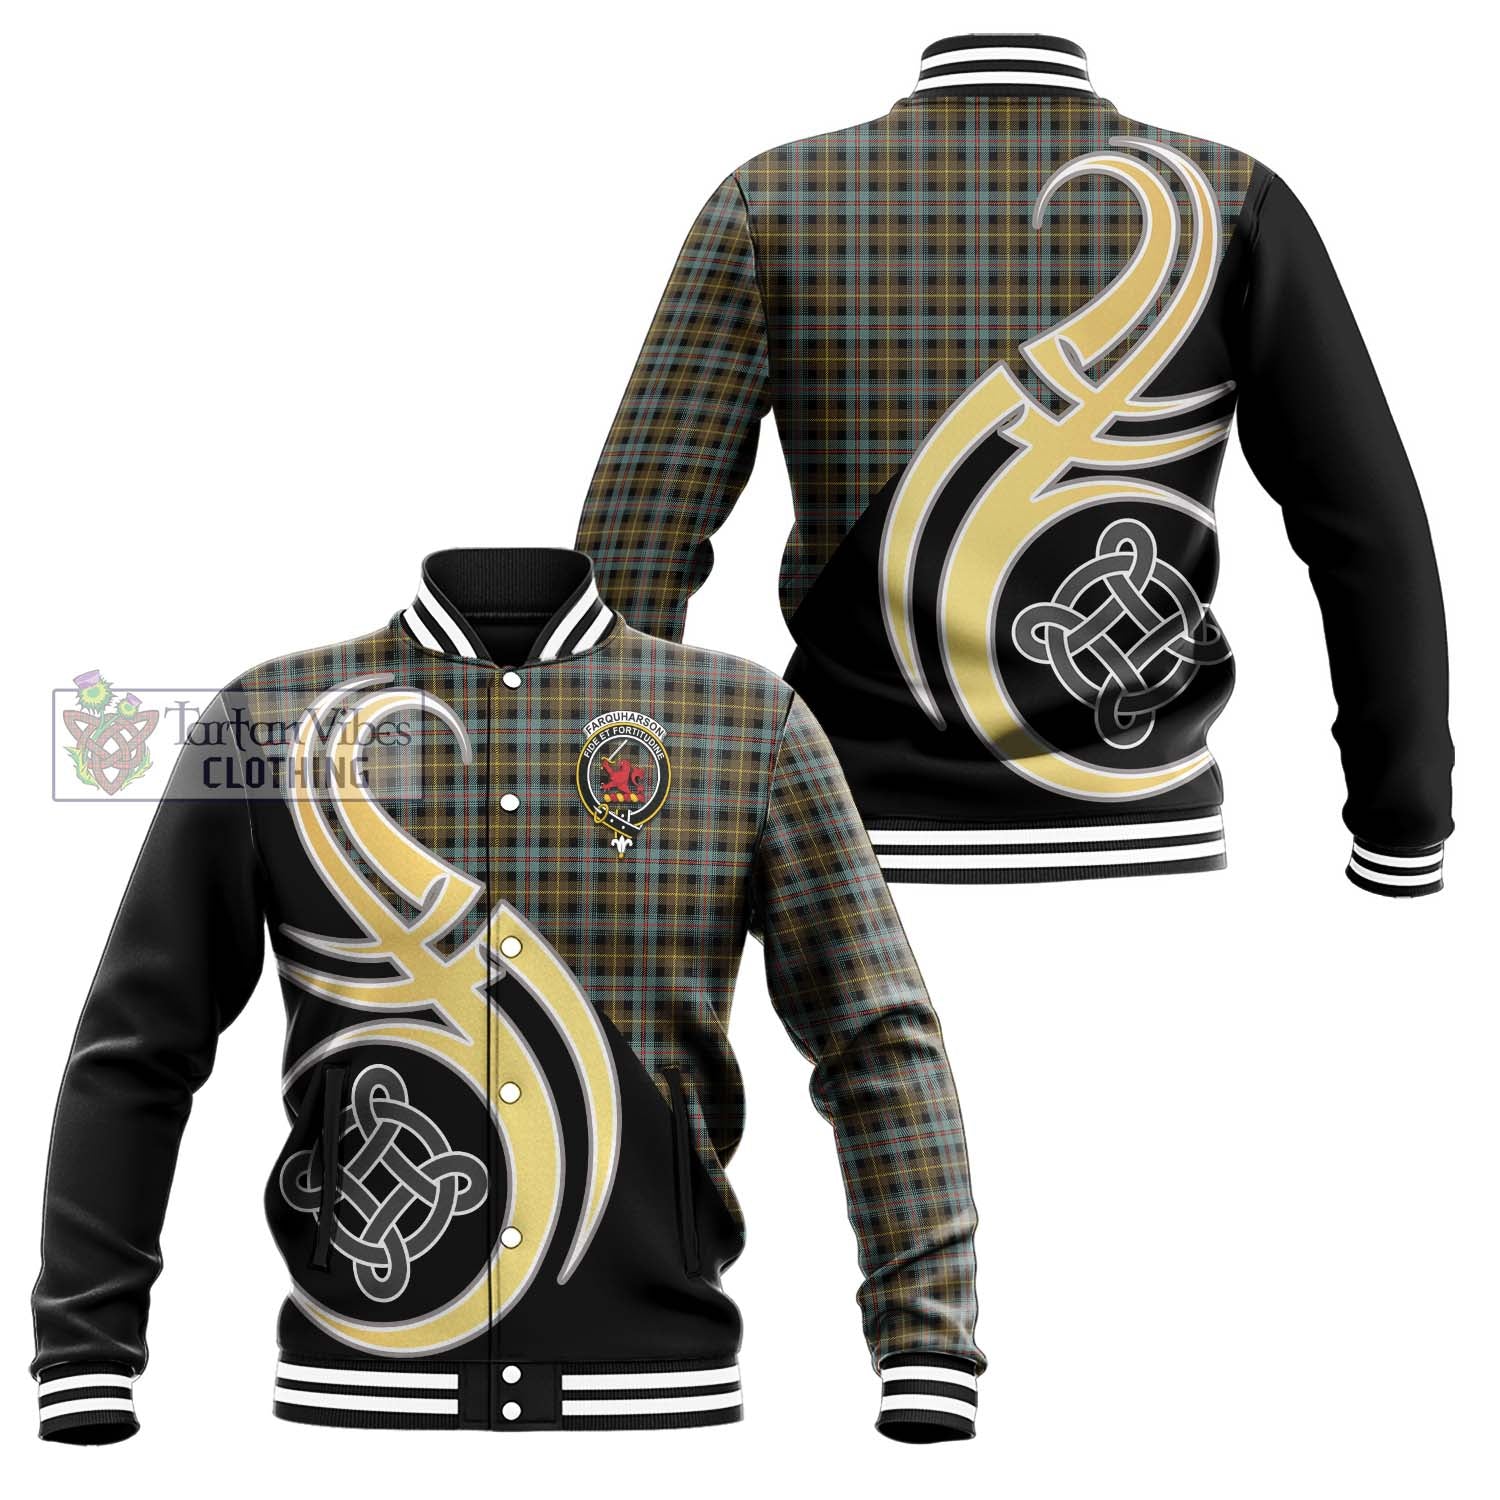 Tartan Vibes Clothing Farquharson Weathered Tartan Baseball Jacket with Family Crest and Celtic Symbol Style